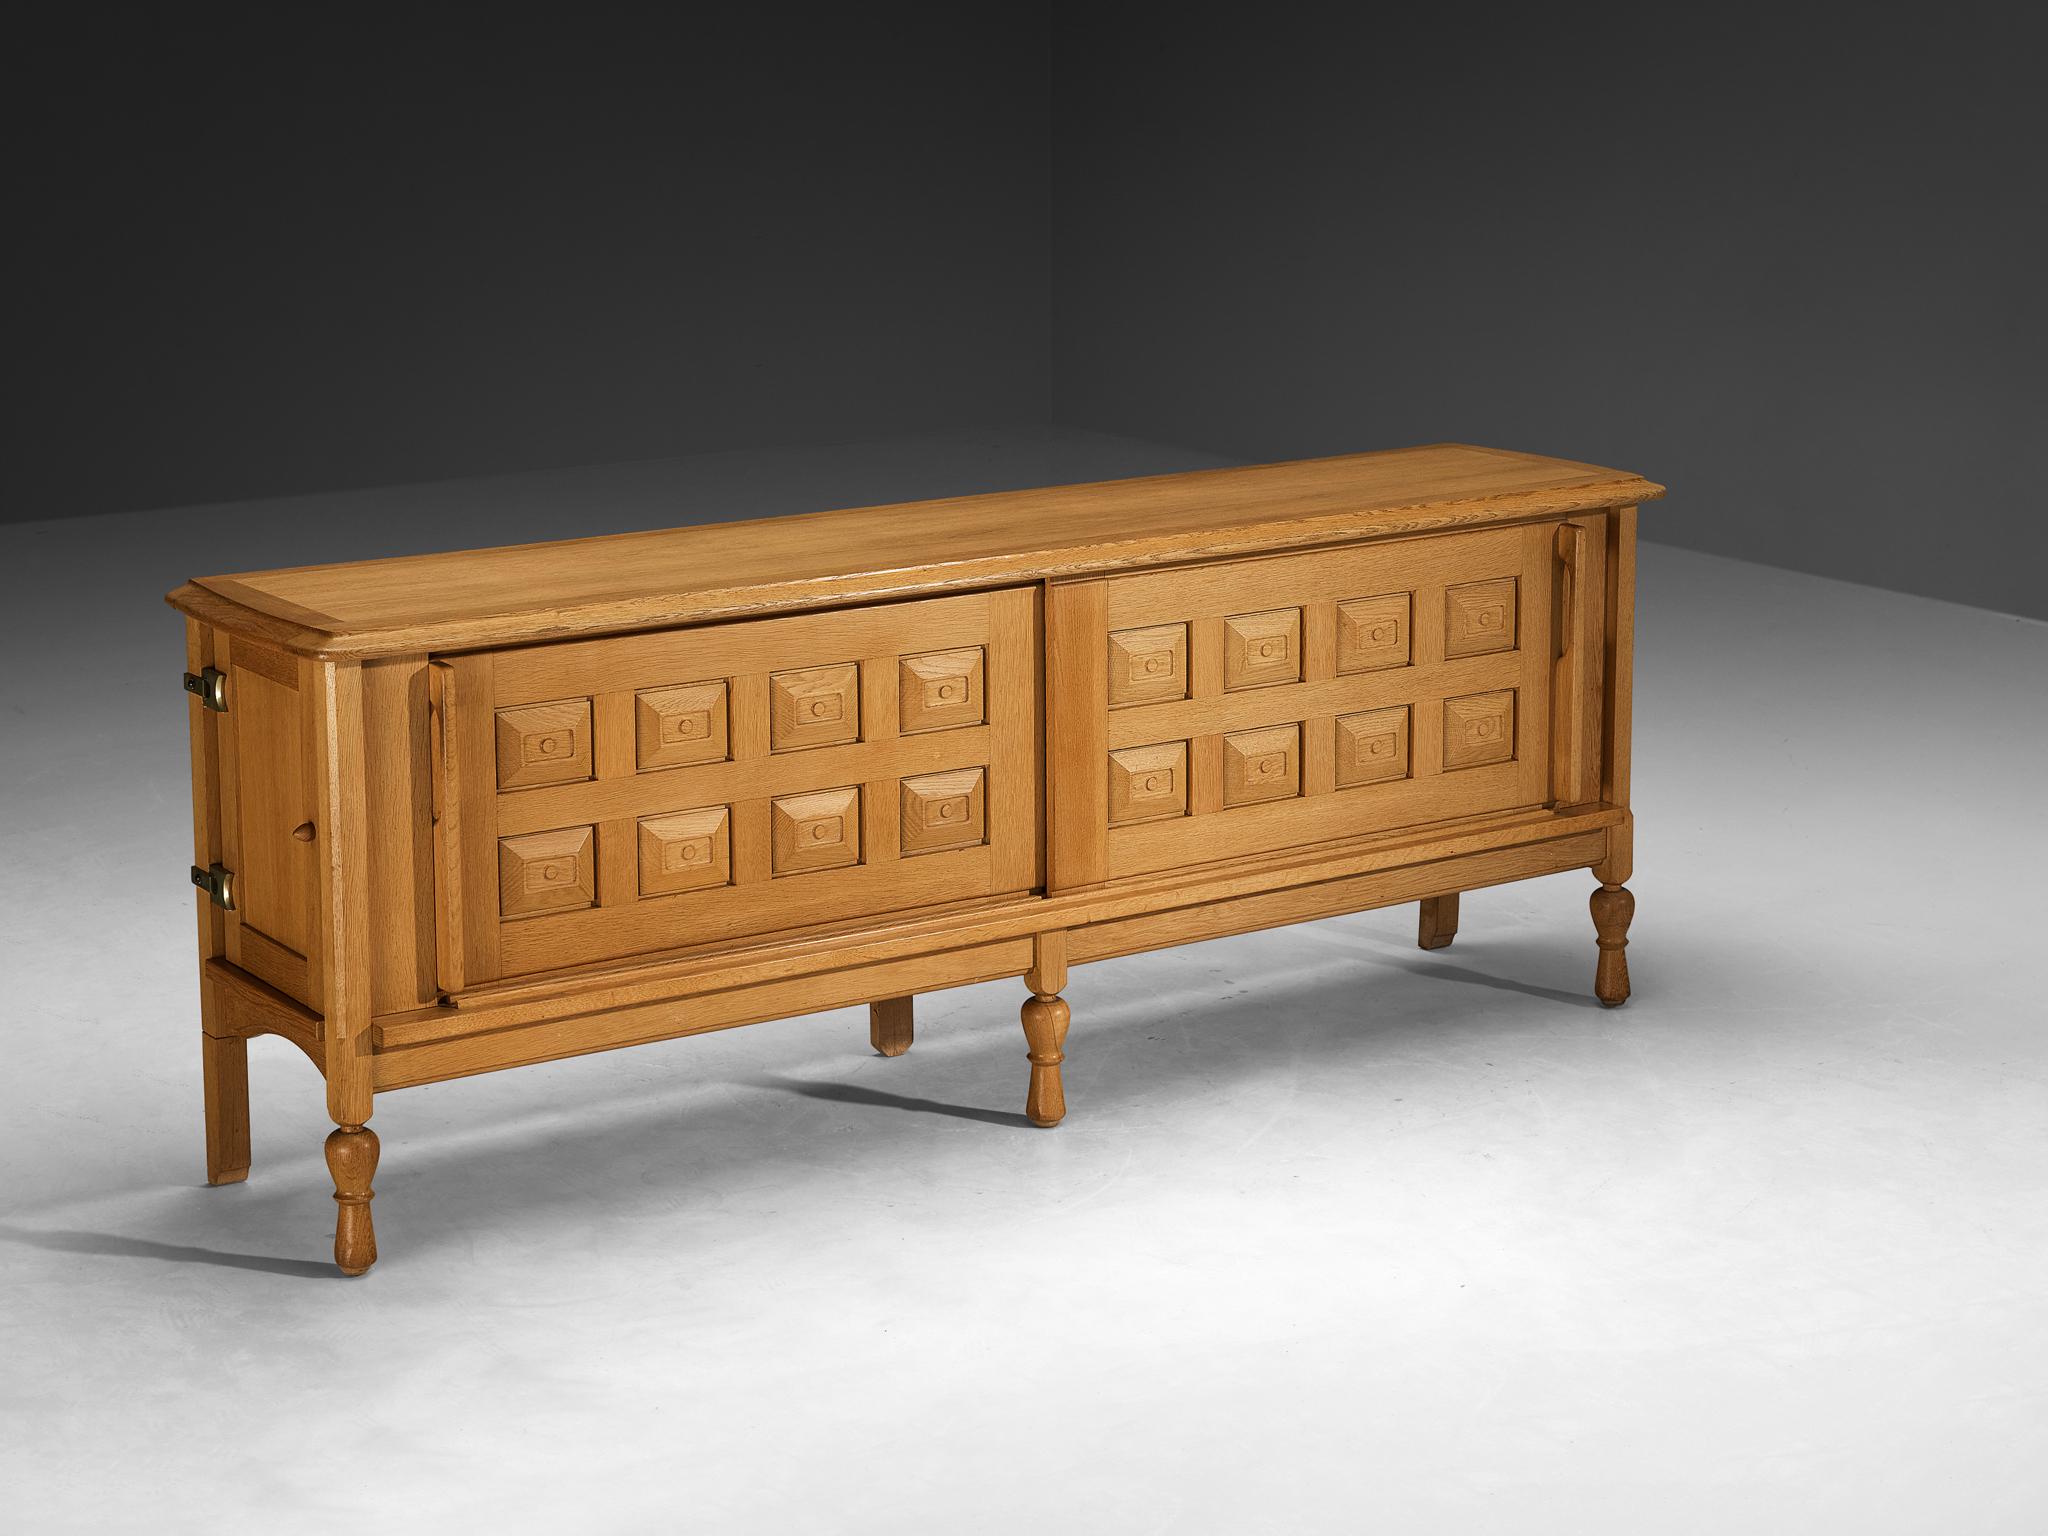 Guillerme et Chambron for Votre Maison, 'Mathias' sideboard, oak, brass, France, 1960s

This outstanding credenza is a design by the French masters Jacques Chambron and Robert Guillerme, dating back to the sixties. Named Mathias, this design is